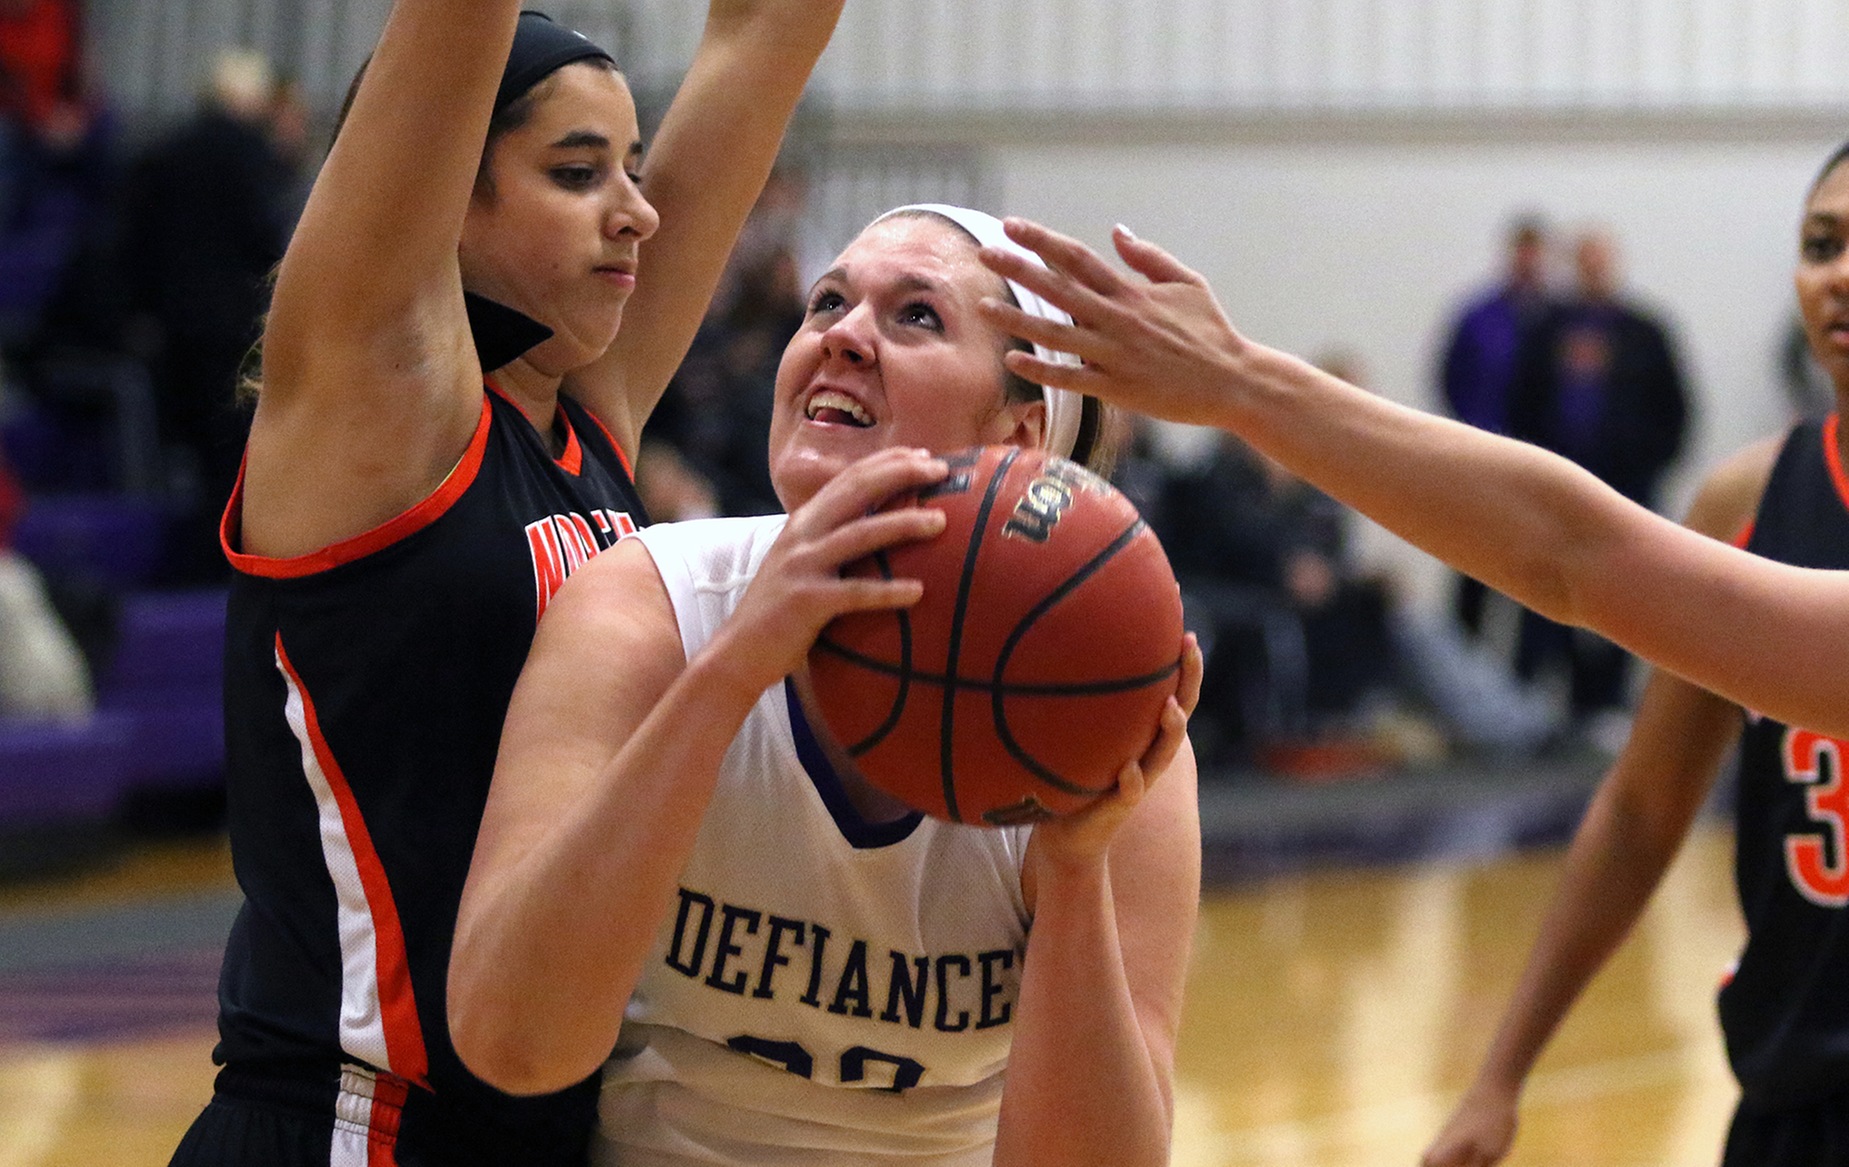 Defiance Rallies to Knock Off Bluffton in Double Overtime